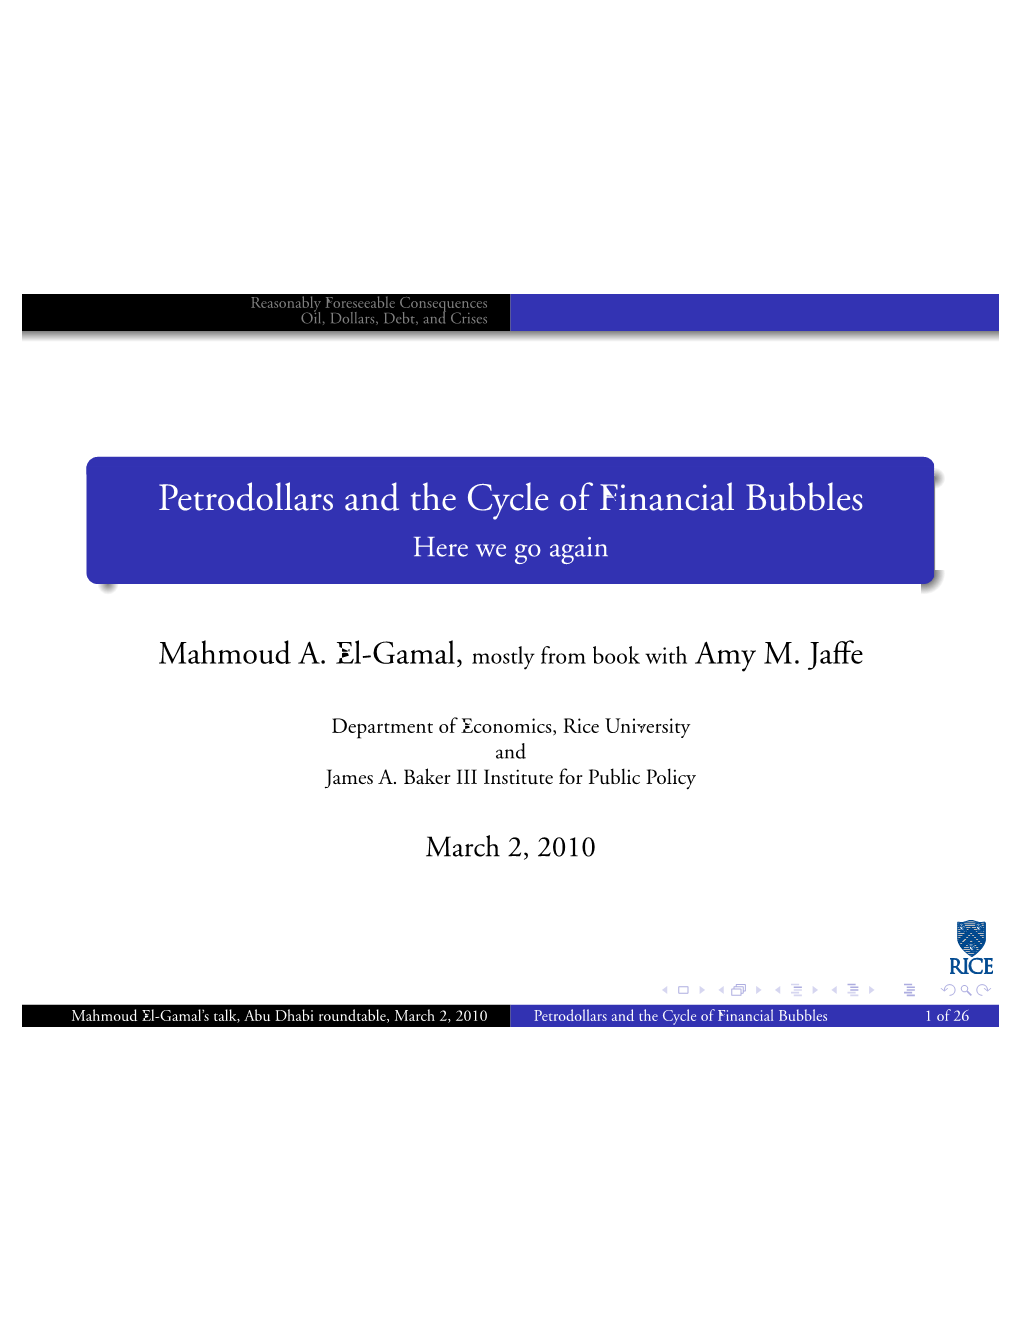 Petrodollars and the Cycle of Financial Bubbles Here We Go Again